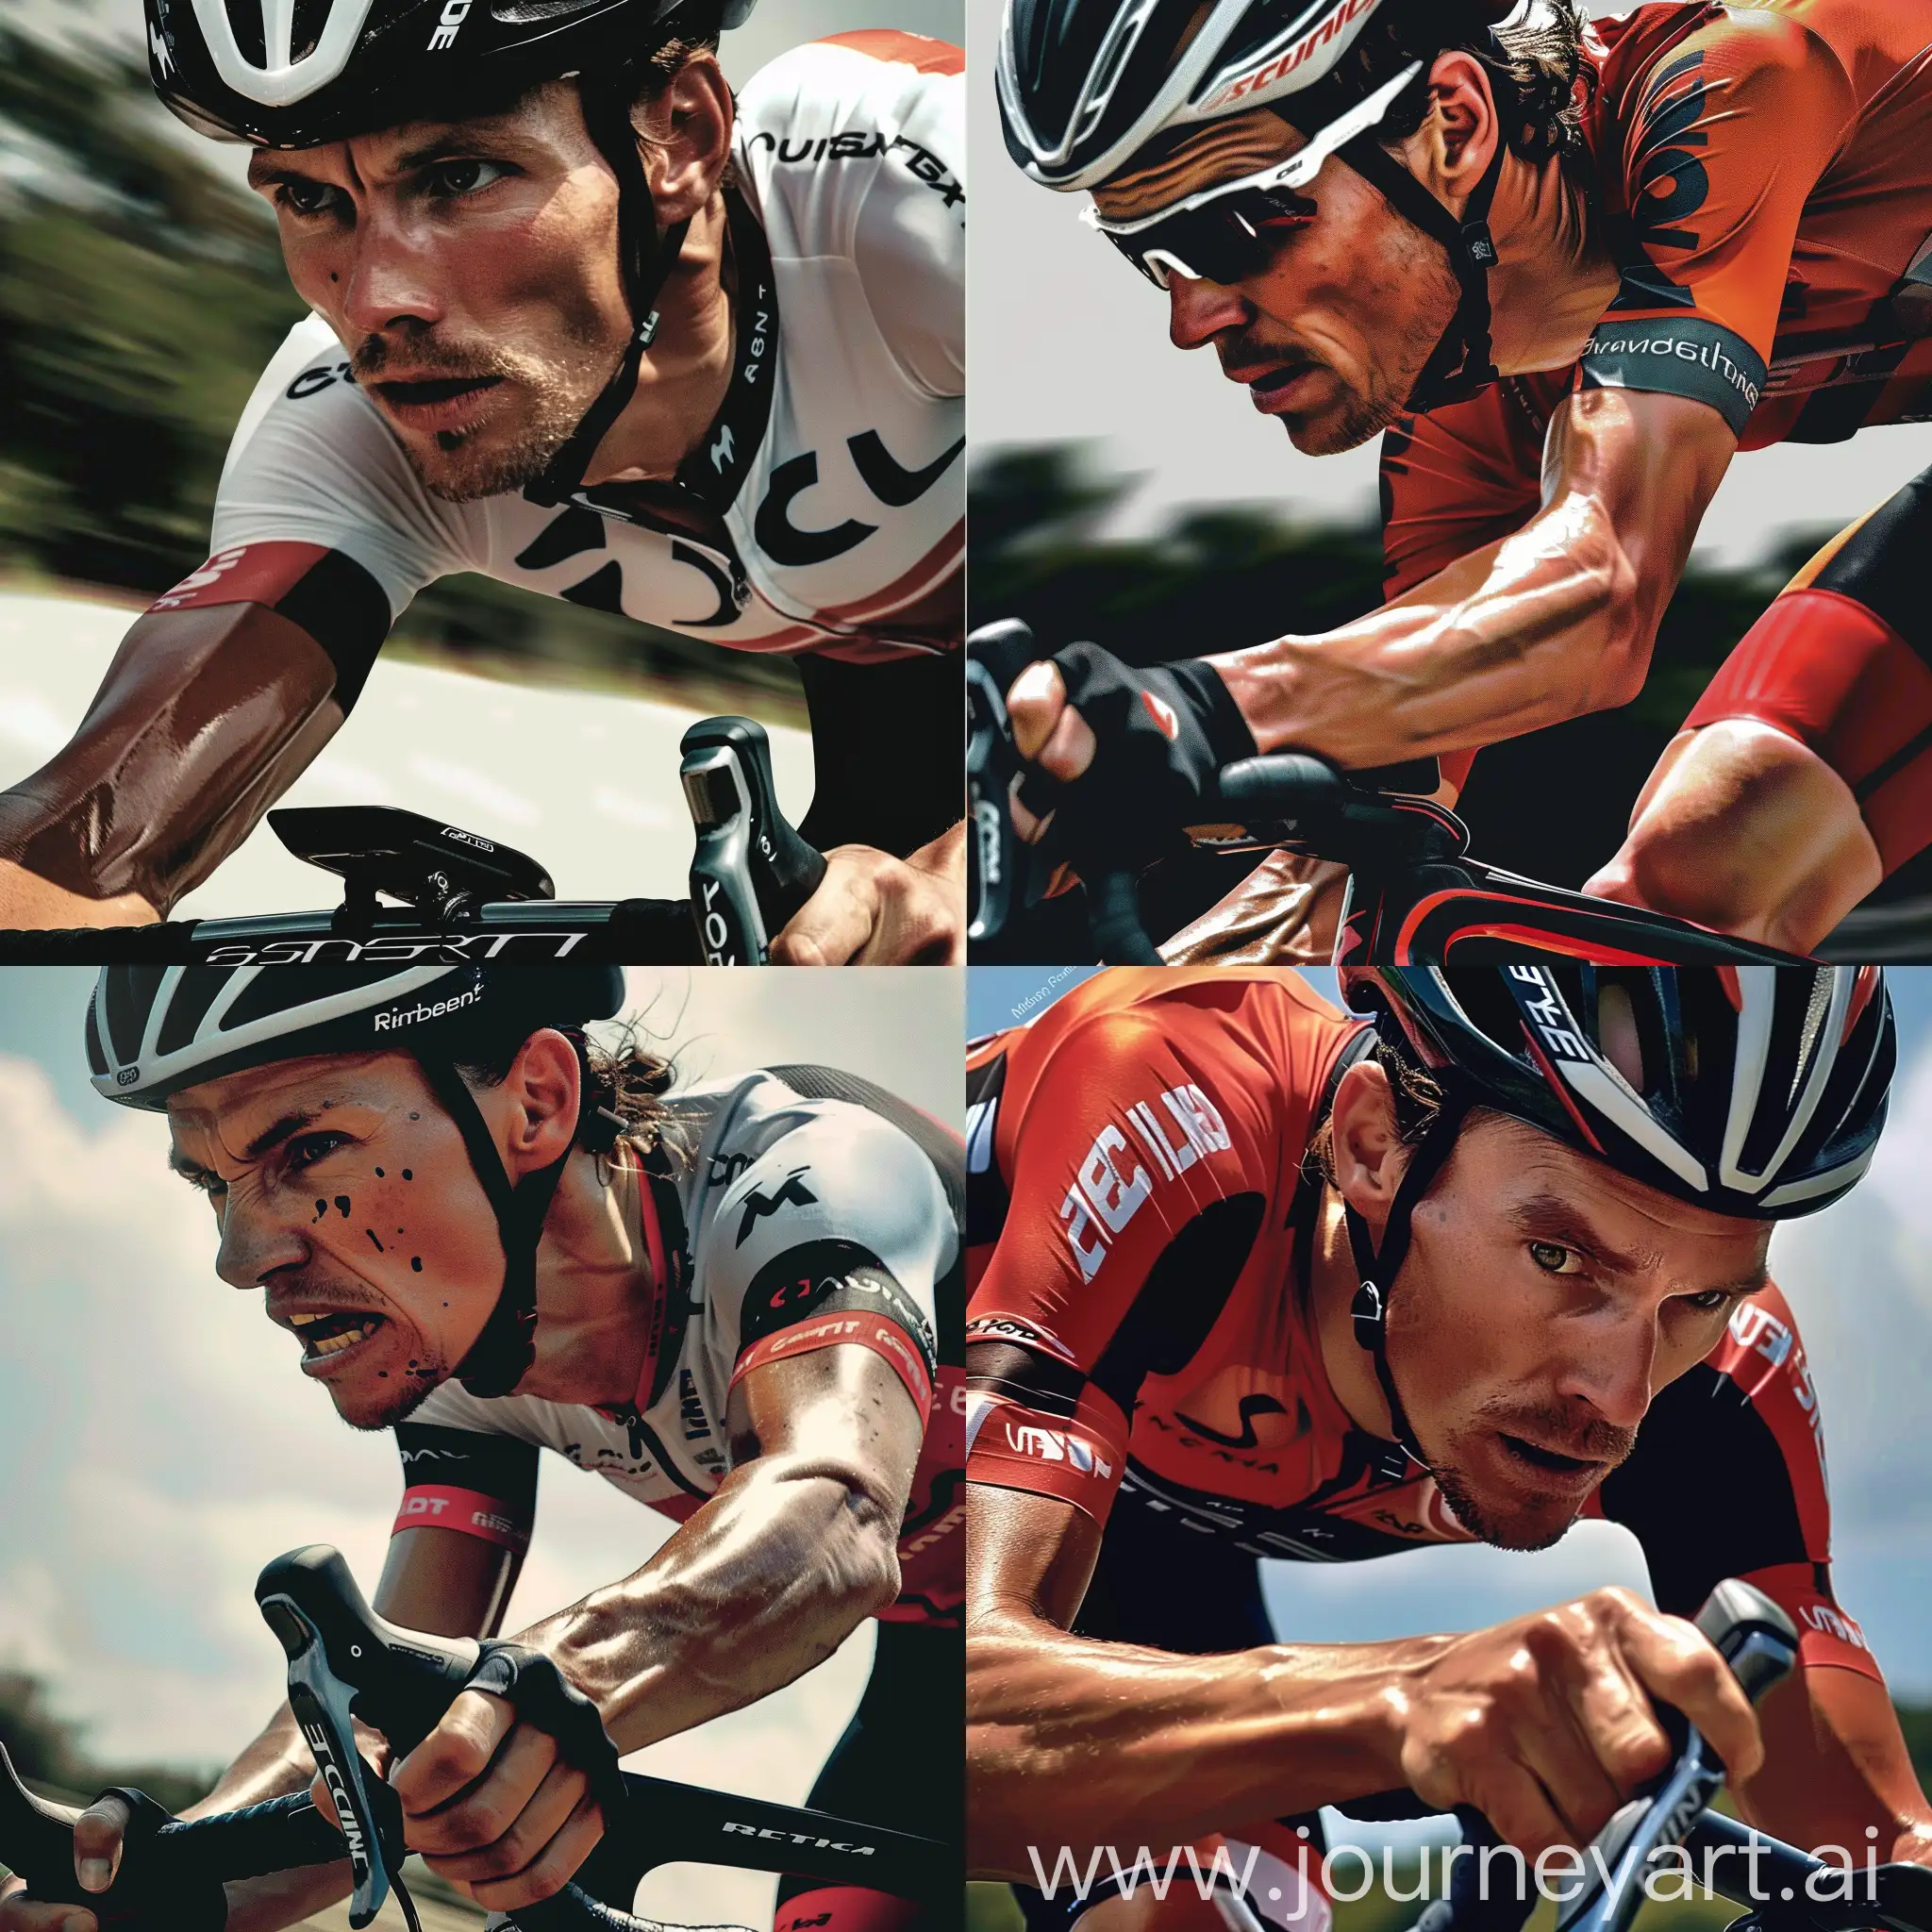 a realistic photo of Consider a design featuring a close-up of the cyclist's focused expression while training, emphasizing their determination and strength. Show cyclist from the side including arm. [photo of a professional cyclist training for a race]. use this image as an example https://image.pollinations.ai/prompt/Consider%20a%20design%20featuring%20a%20close-up%20of%20the%20cyclist's%20focused%20expression%20while%20training,%20emphasizing%20their%20determination%20and%20strength.%20photo%20of%20a%20professional%20cyclis?nofeed=true&nologo=true] --ar 16:9 --stylize 750 --v 6